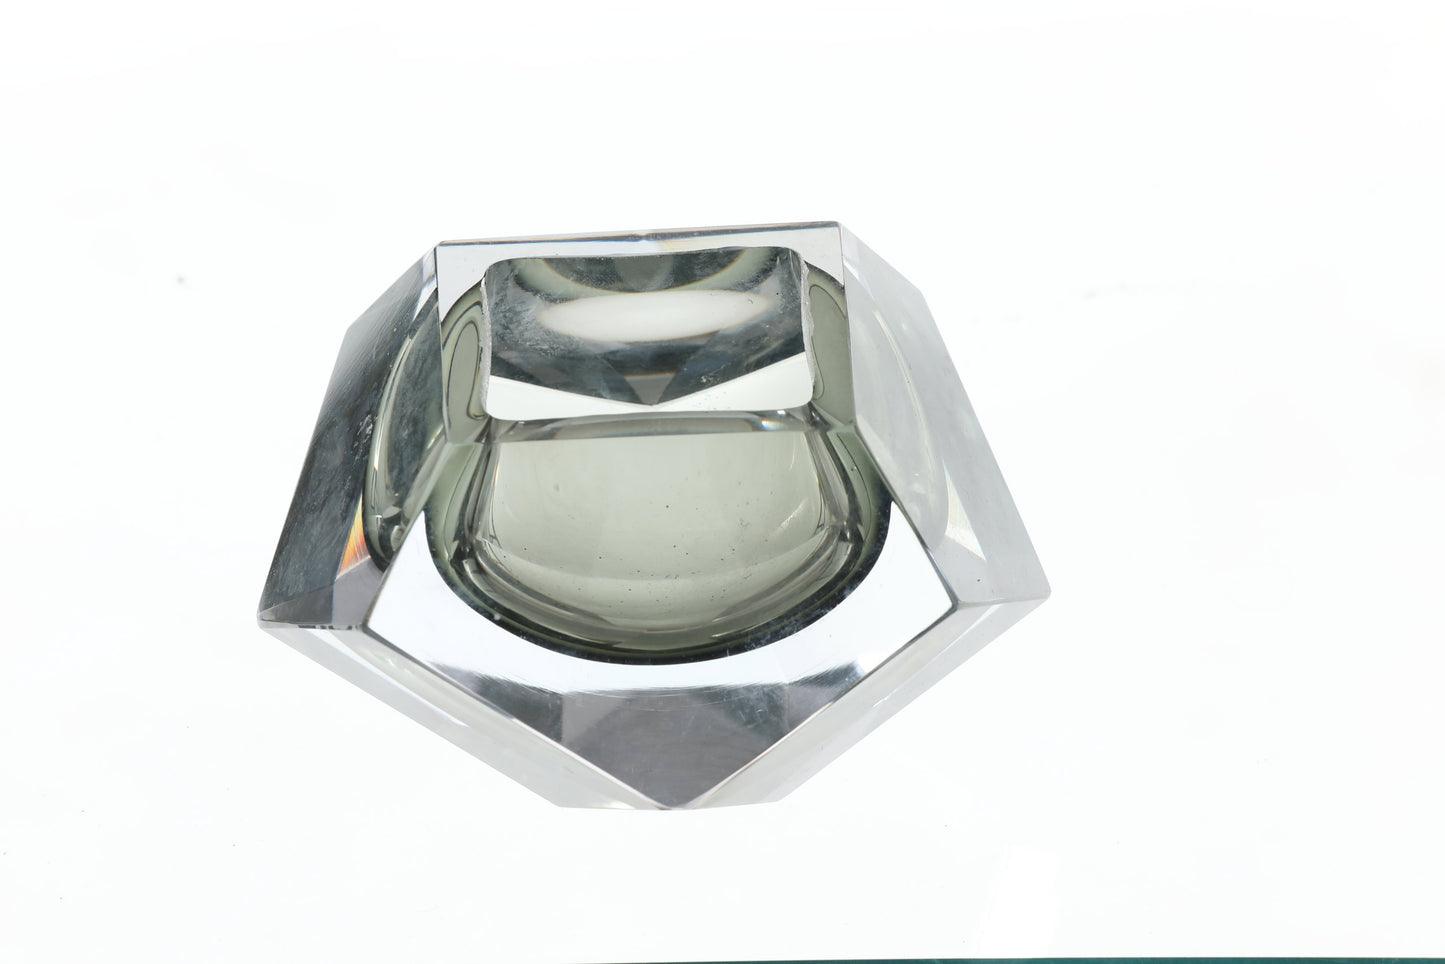 Faceted submerged glass ashtray